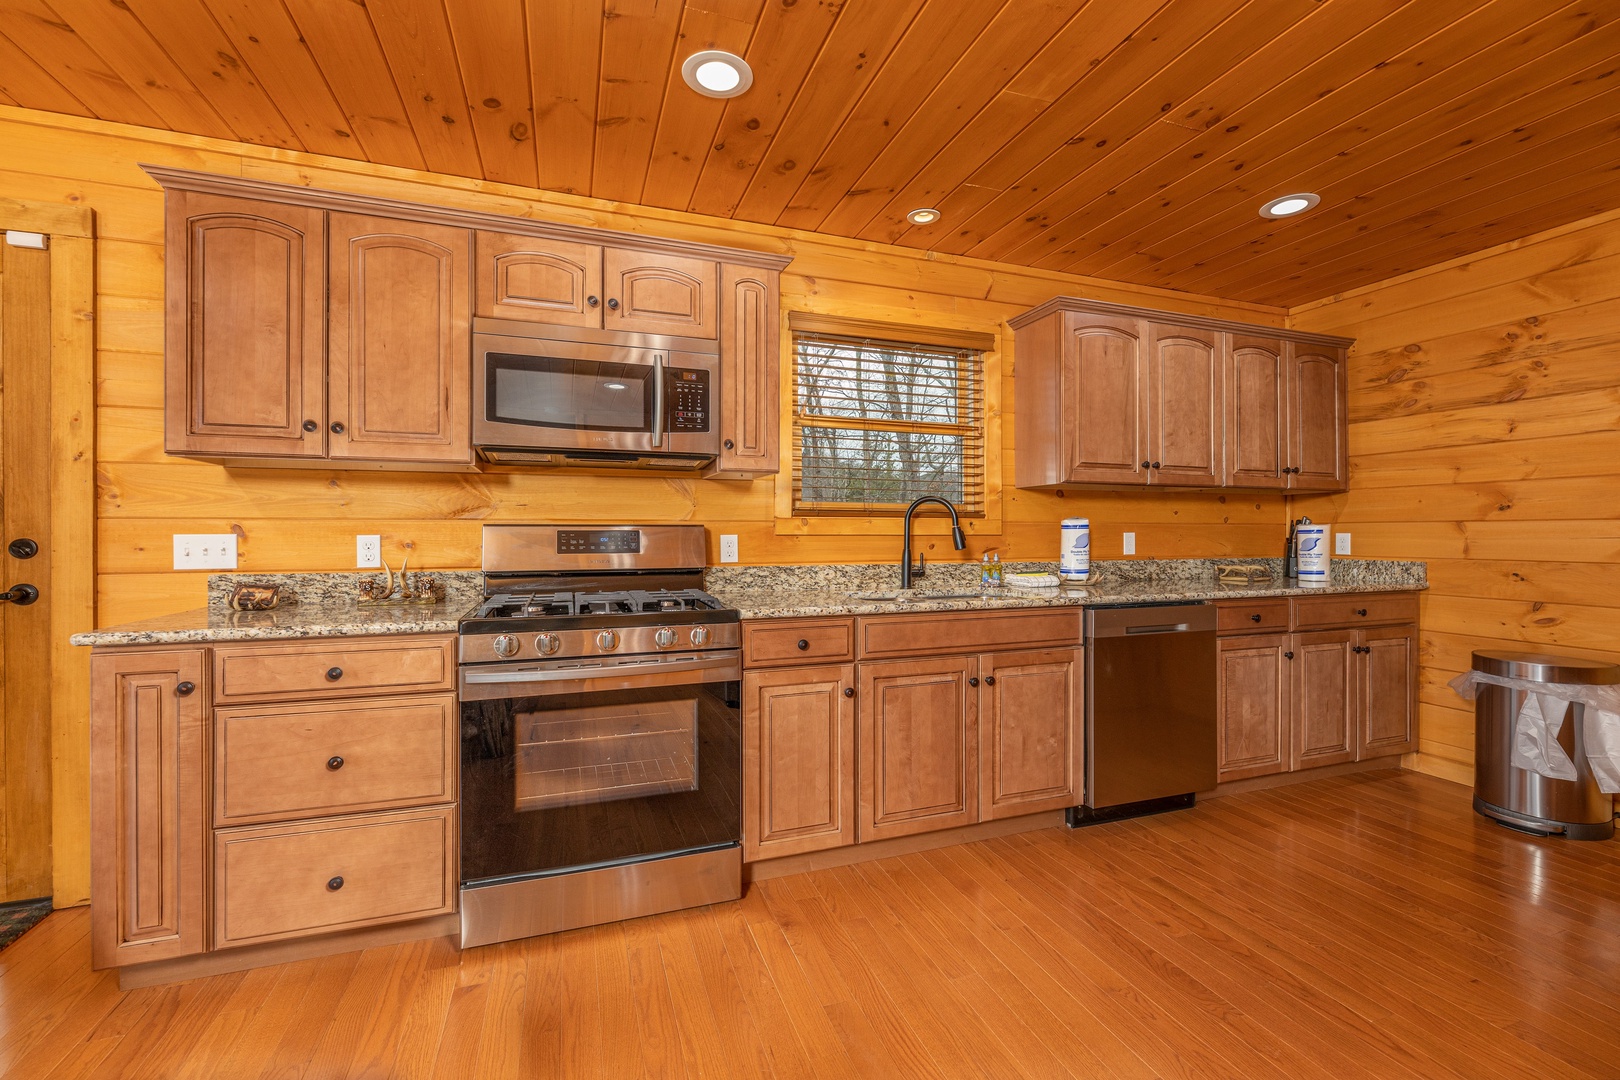 Kitchen with stainless appliances and granite counters at J's Hideaway, a 4 bedroom cabin rental located in Pigeon Forge